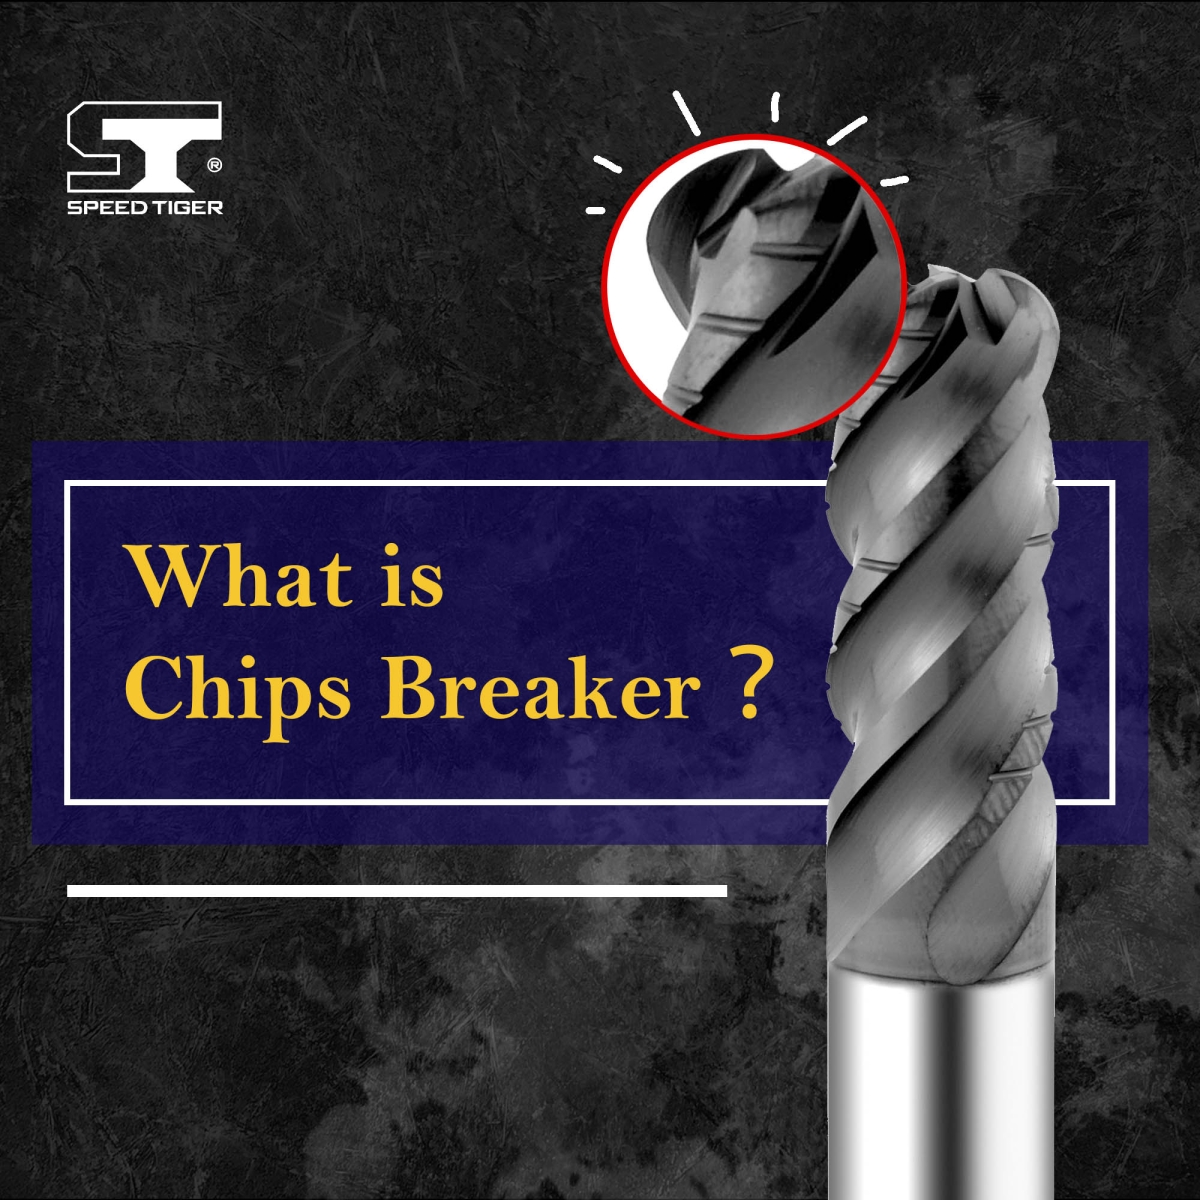 whats chip breaker_speed tiger